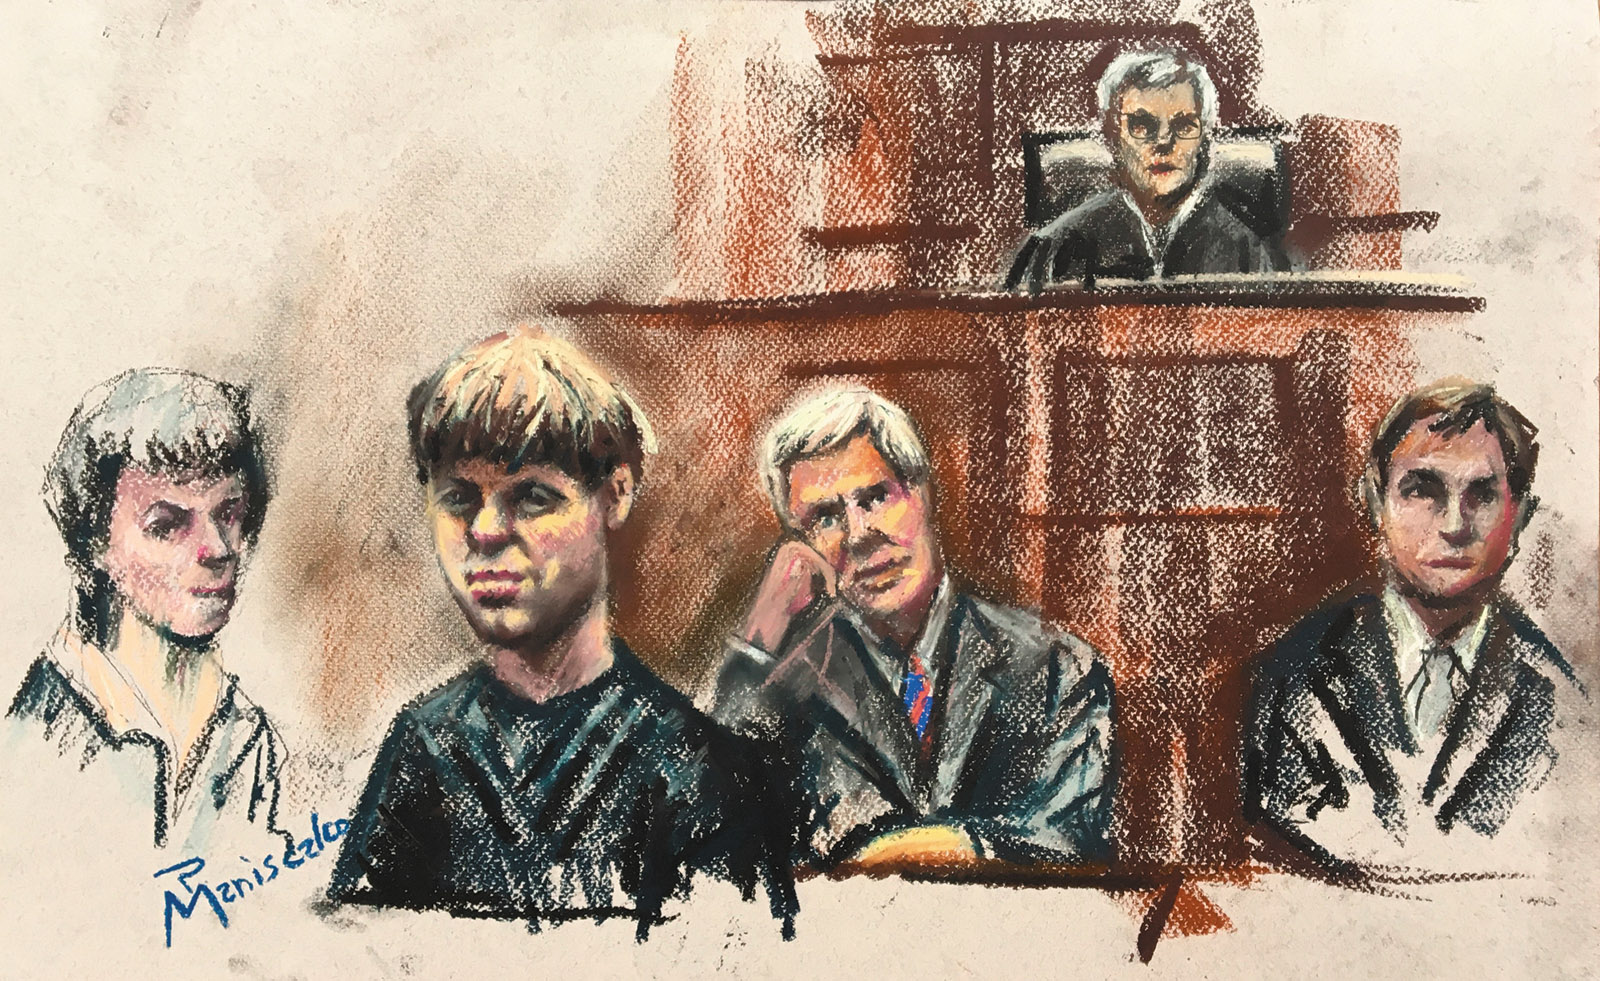 Dylann Roof (second from left) during the initial stage of jury selection for his trial for the murder of nine worshipers at the Emanuel African Methodist Episcopal Church, Charleston, South Carolina, September 2016